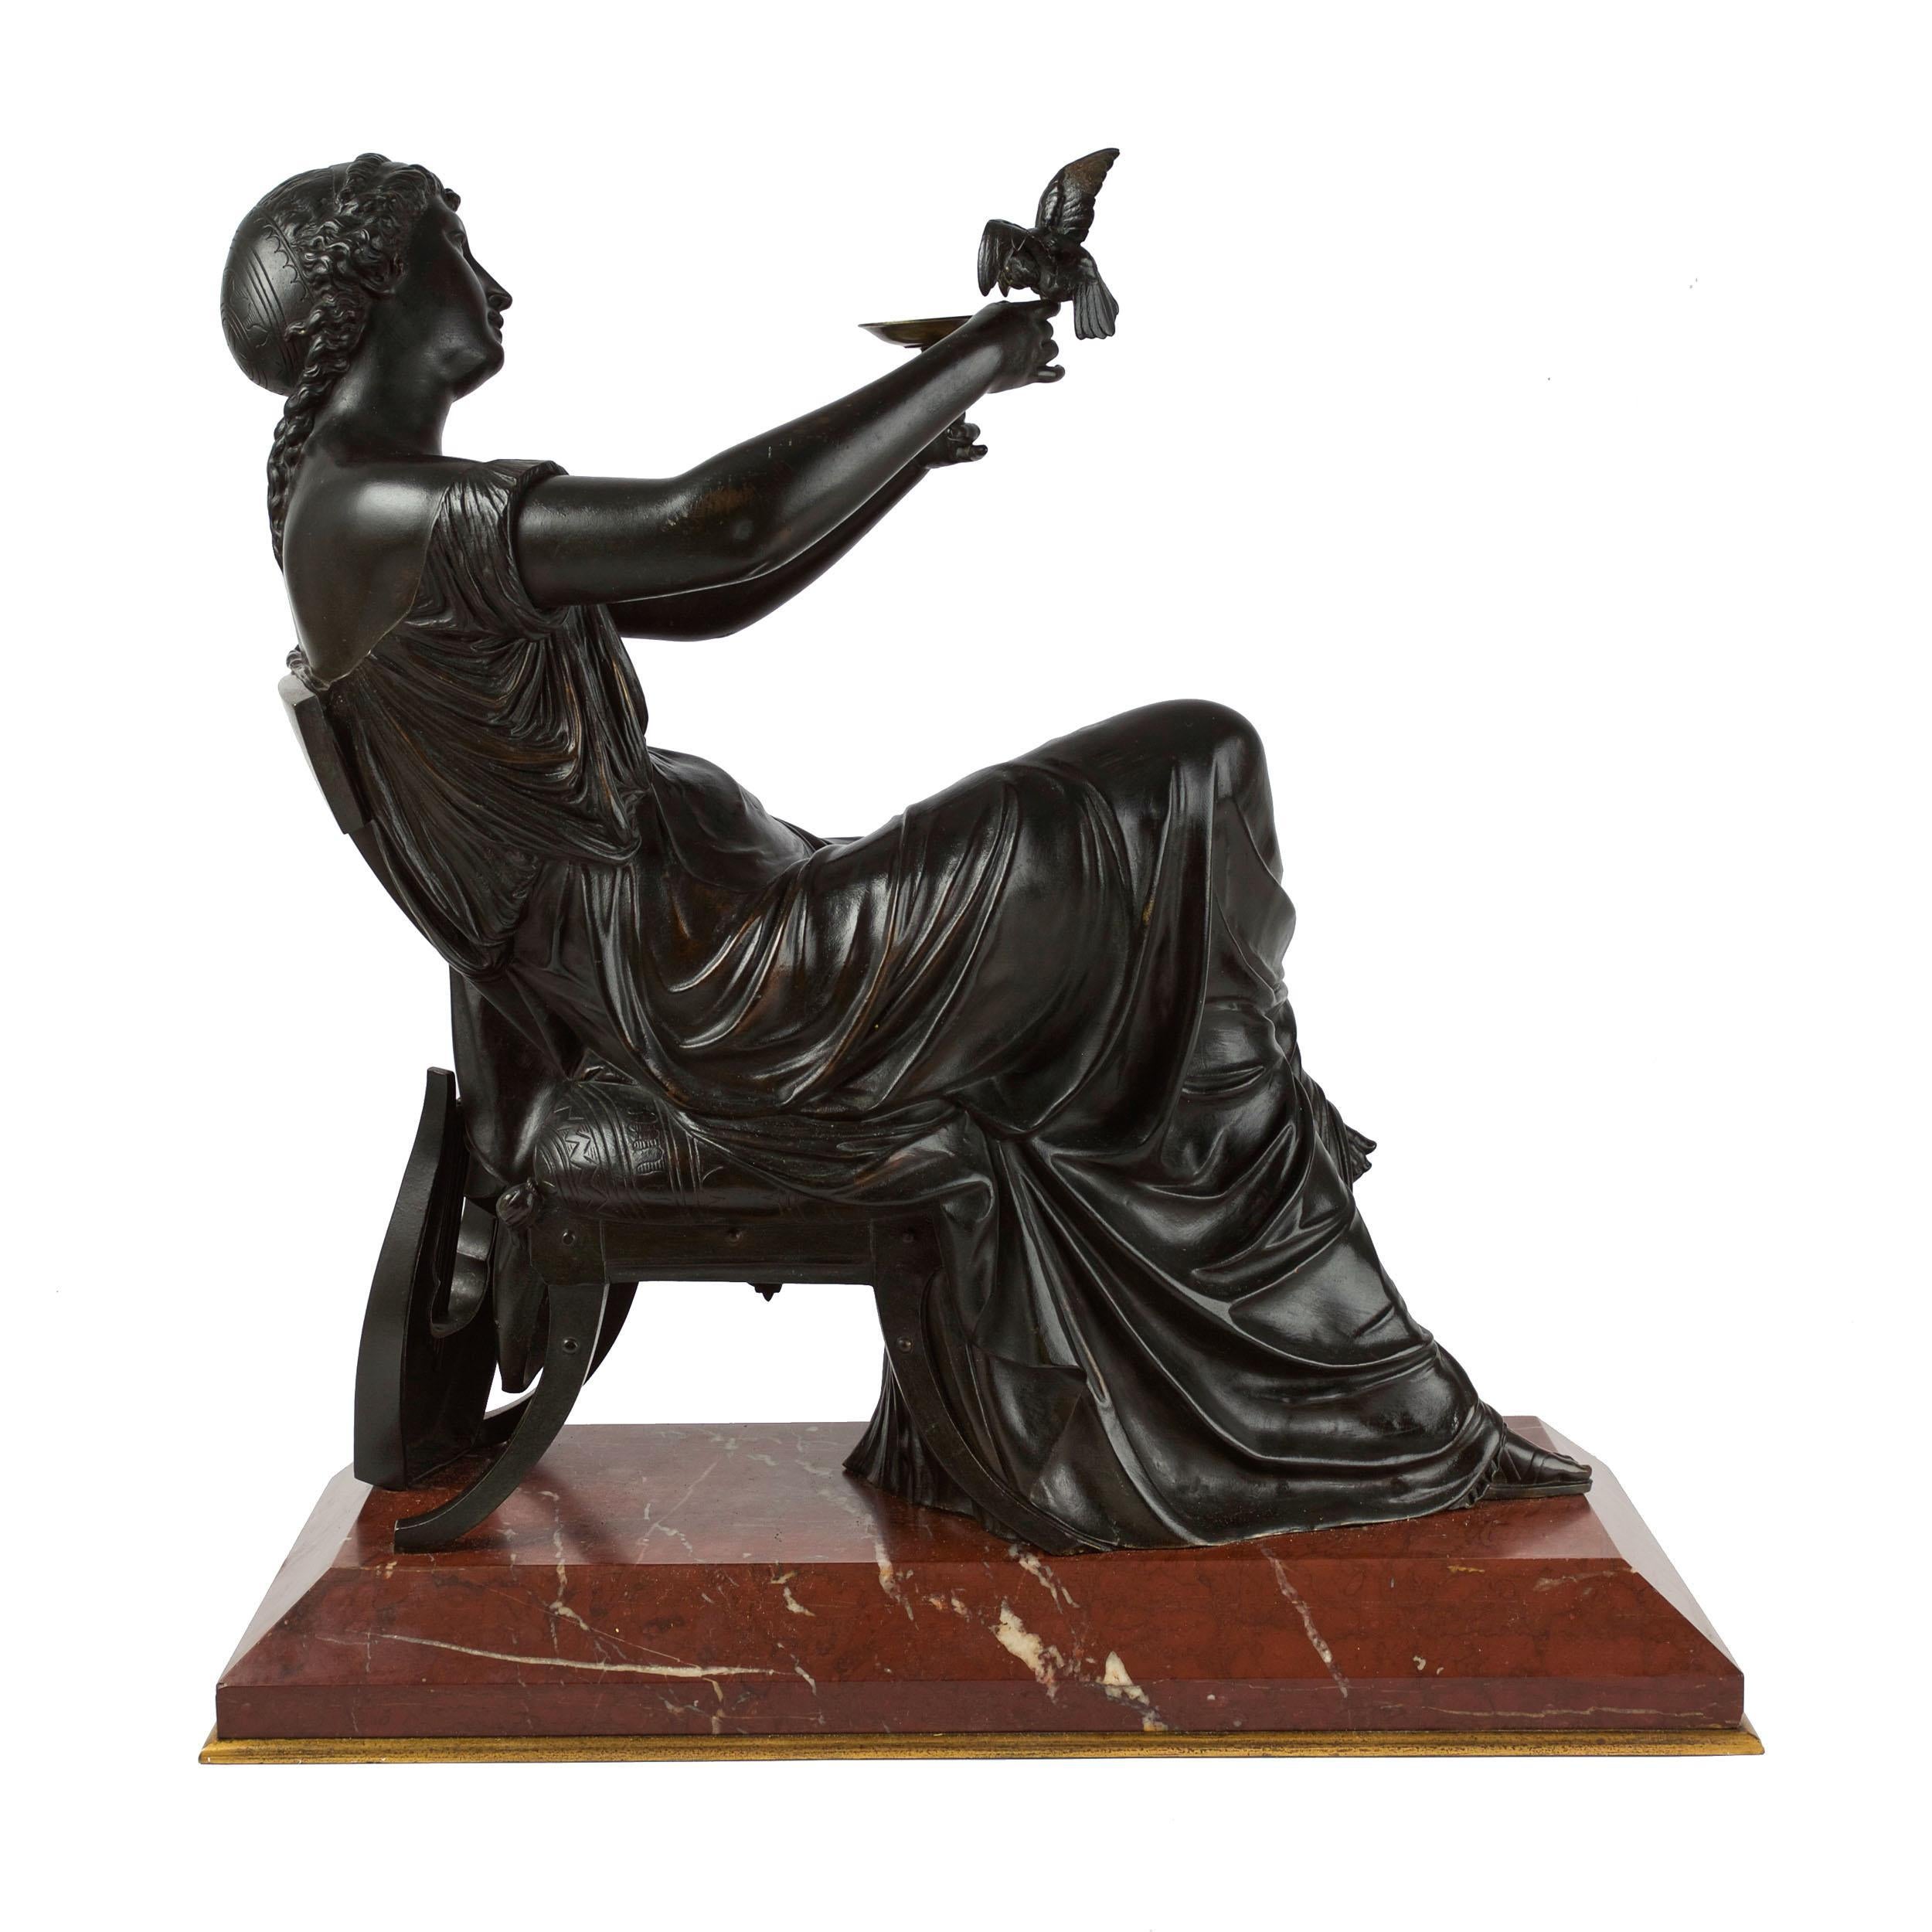 19th Century French Antique Bronze Sculpture of Seated Sappho by Francois Mage 1